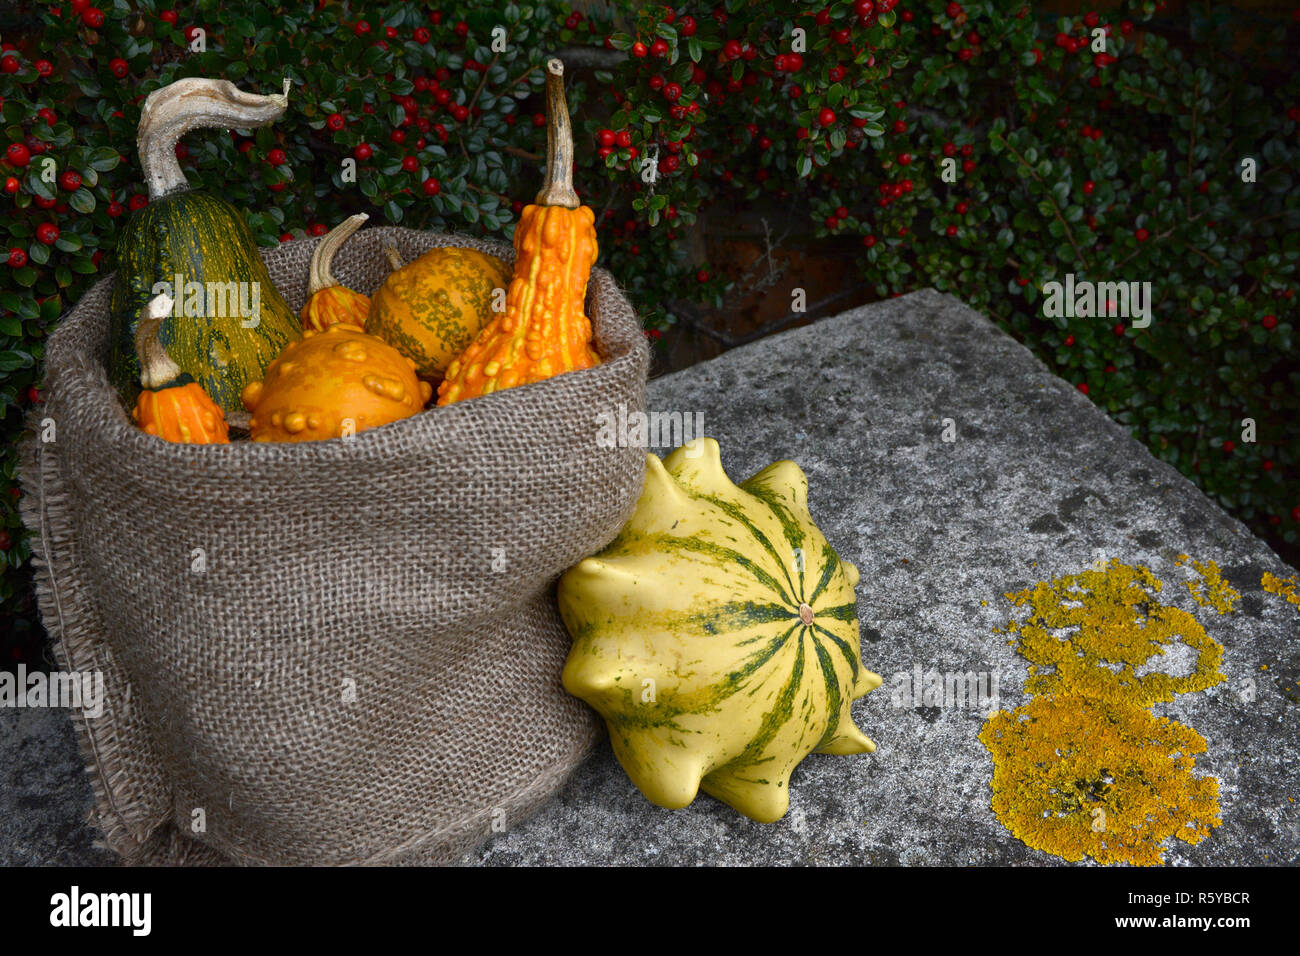 Hessian sack of ornamental gourds on a stone bench Stock Photo